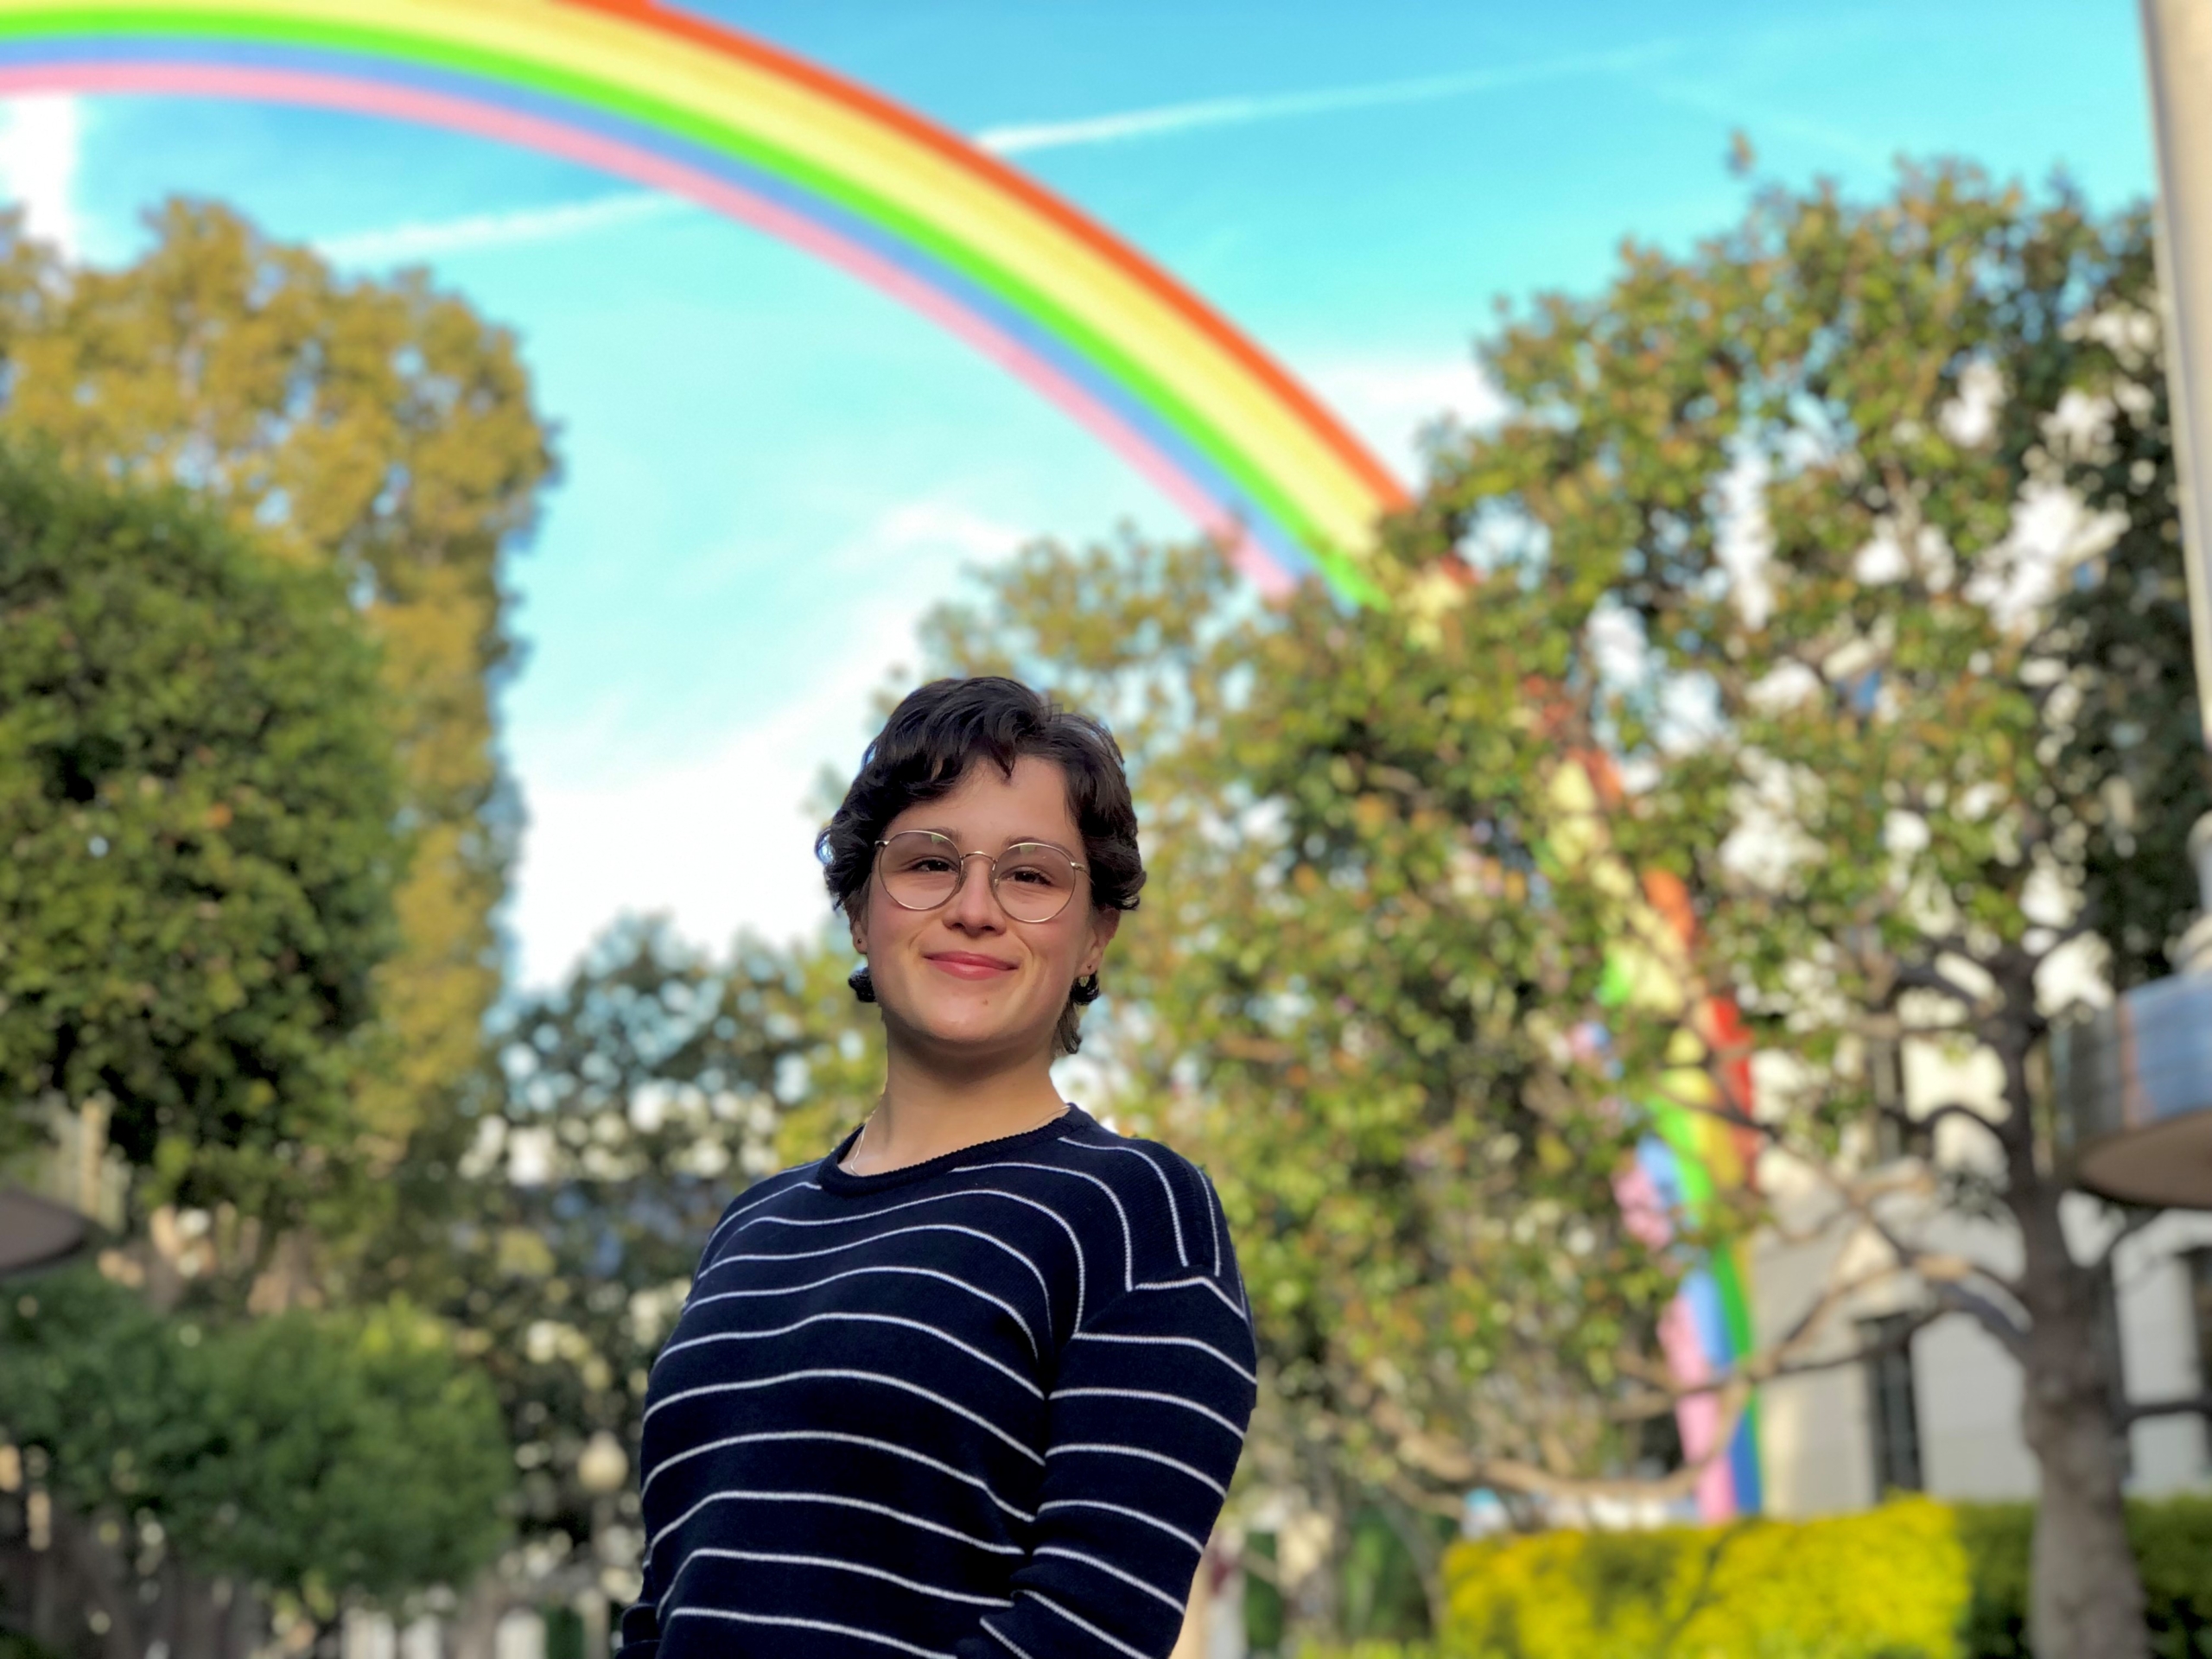 Hannah Hull photographed standing with trees and a rainbow structure in the background.